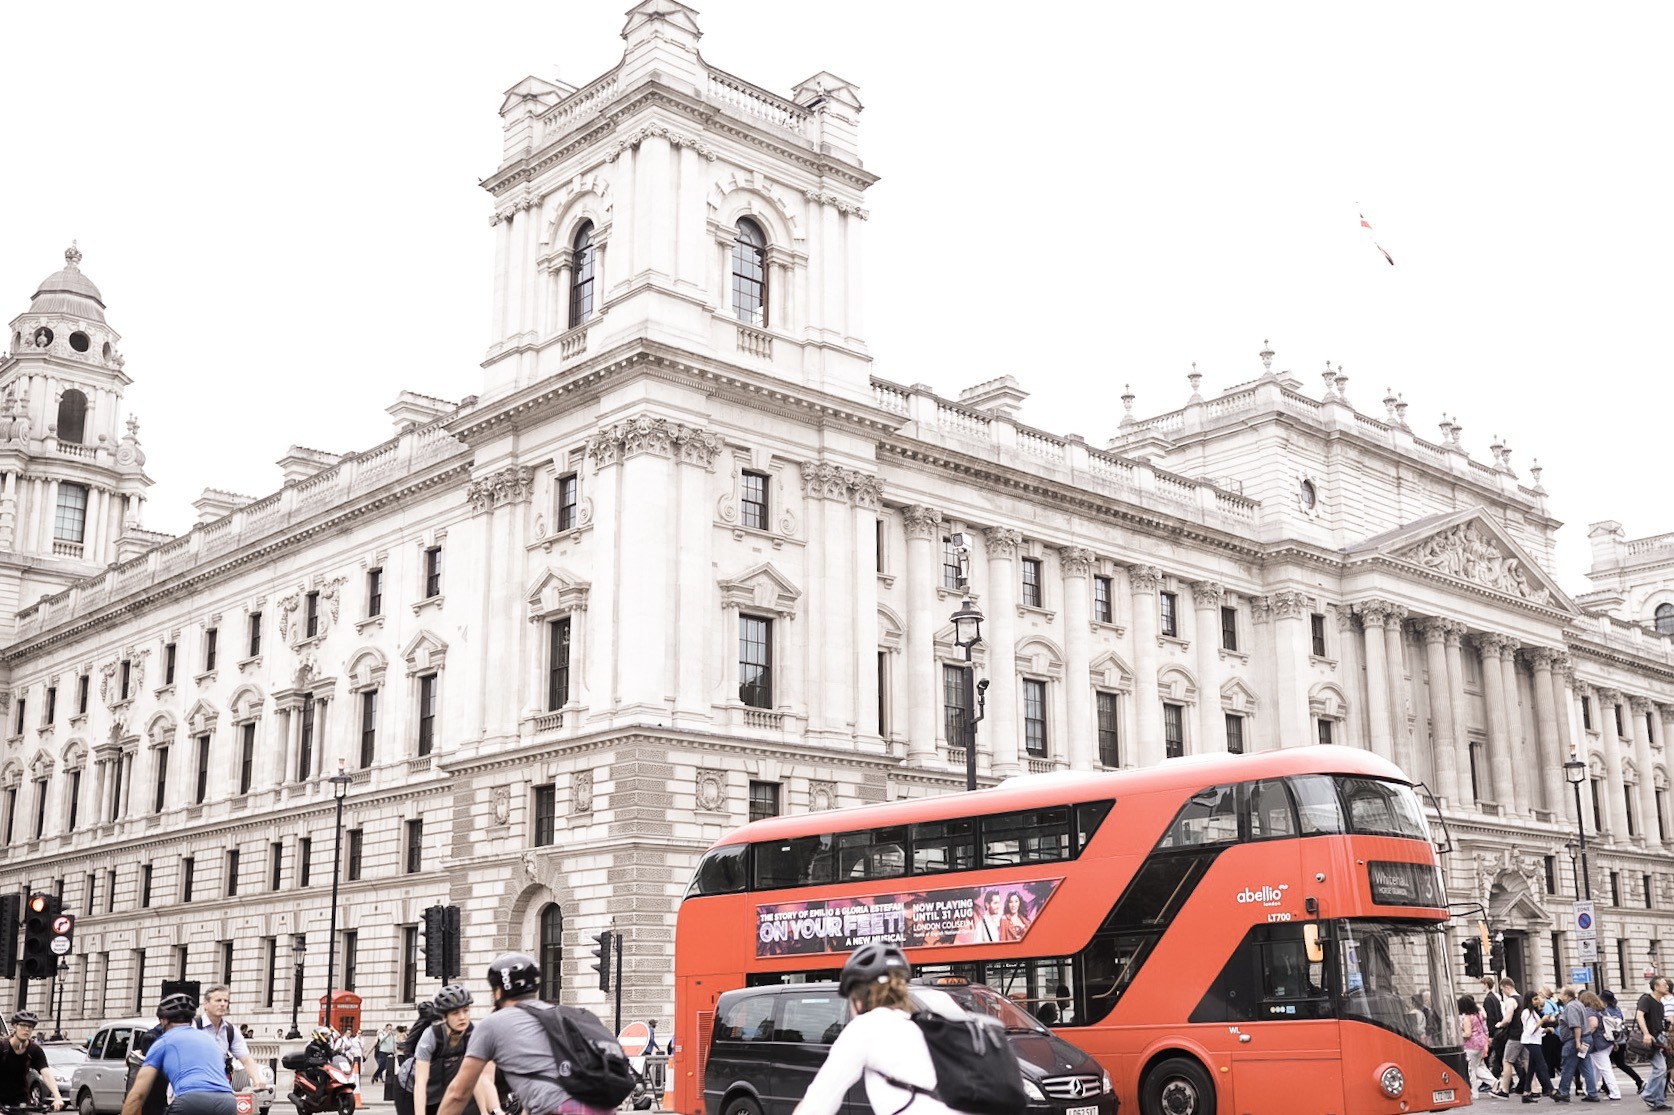 How to Explore London like a Local Tour Guide Places to See Thames River Parliament Westminister Abbey Big Ben London Eye Faiza Inam Travels SincerelyHumble 2